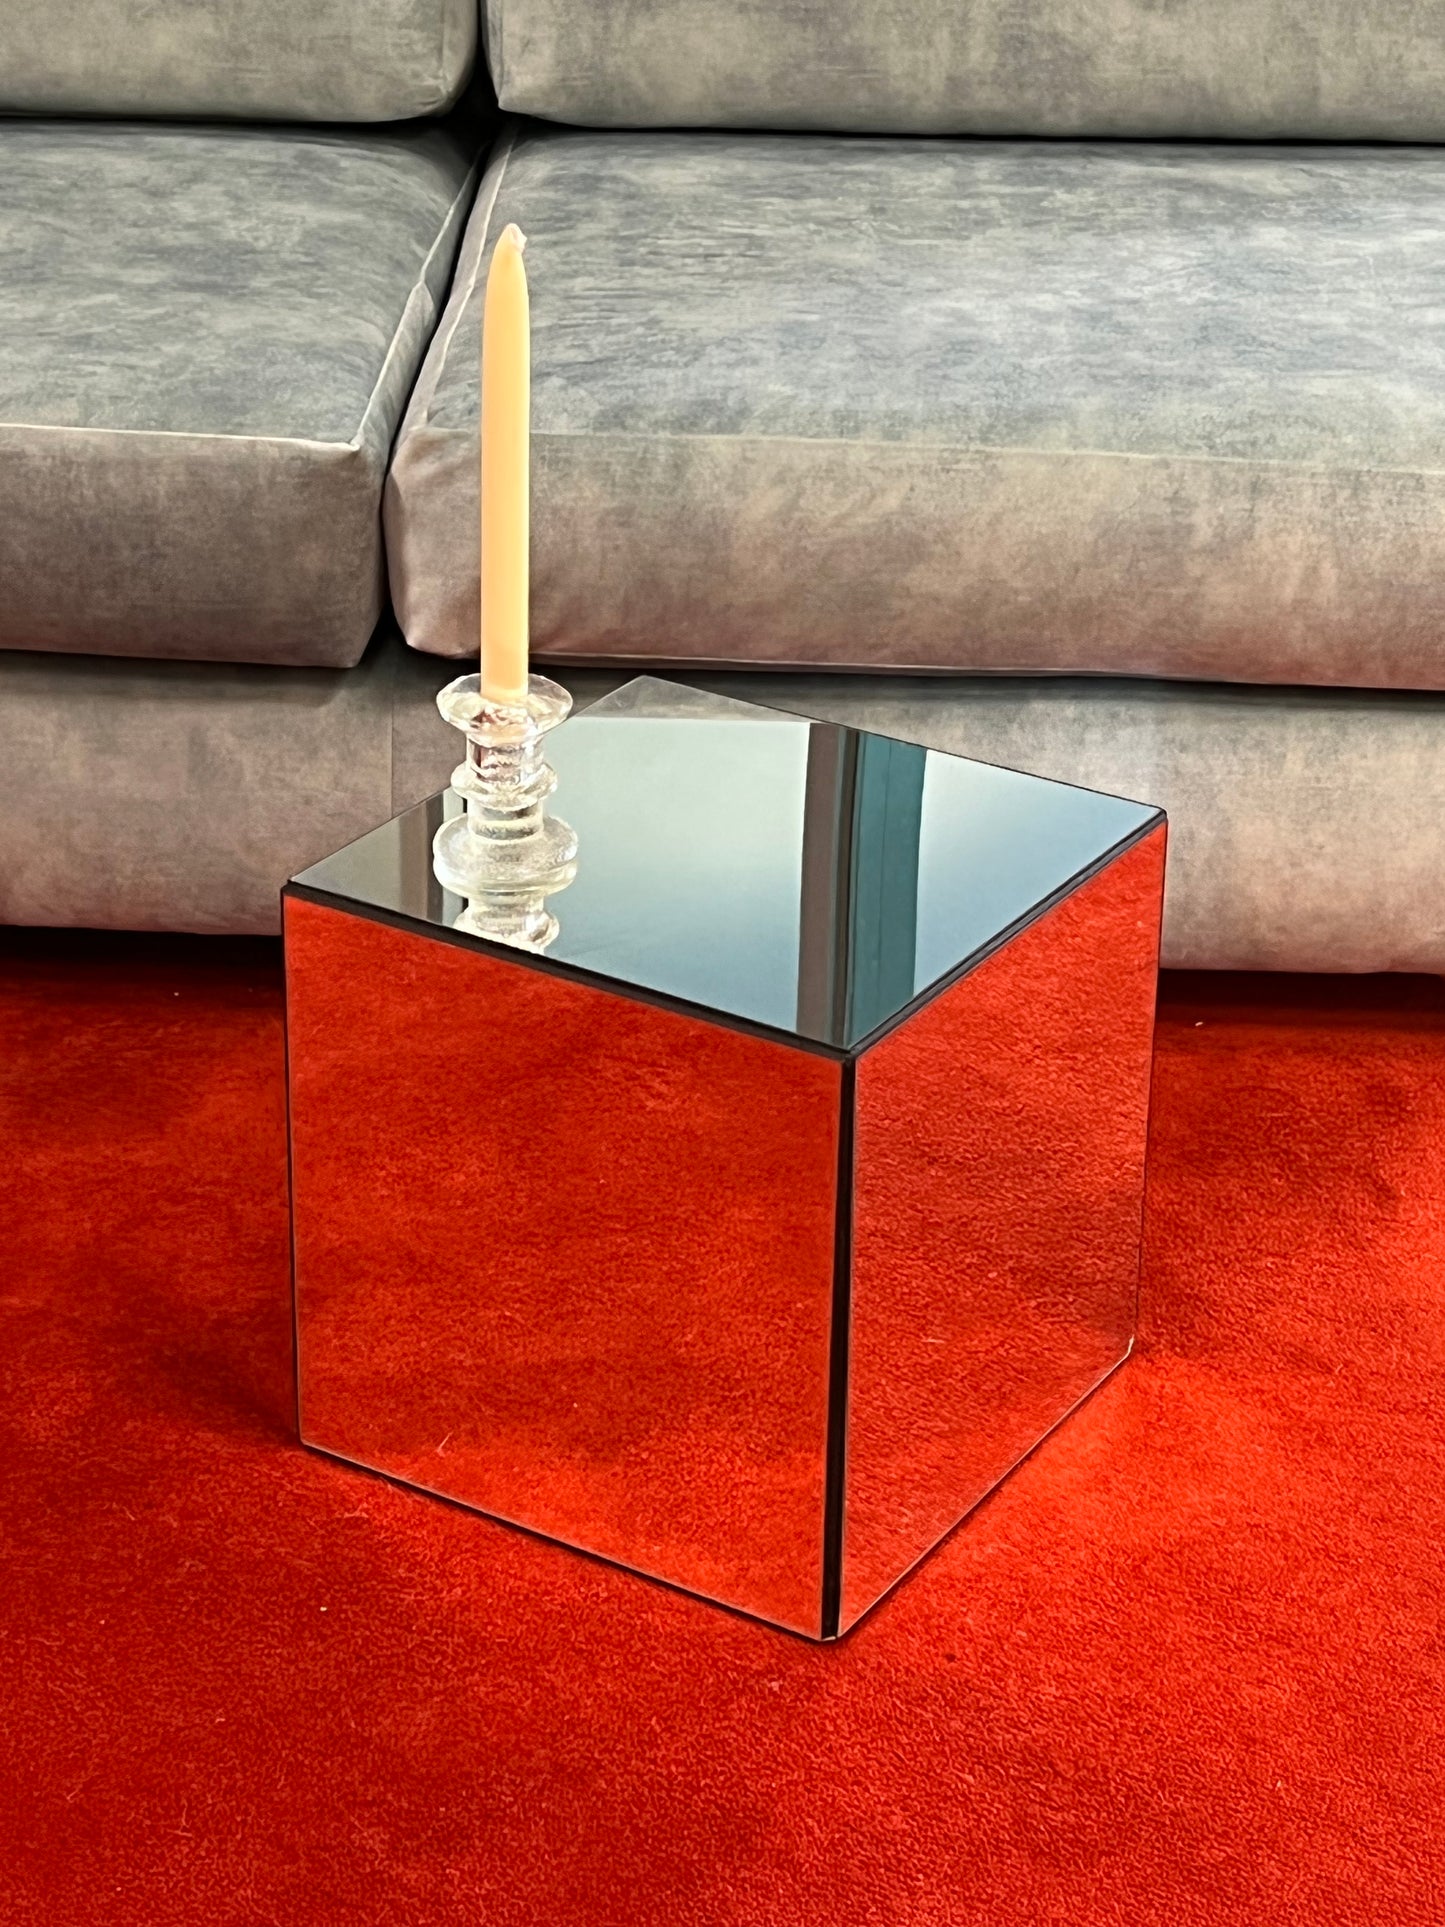 Mirror cube stand